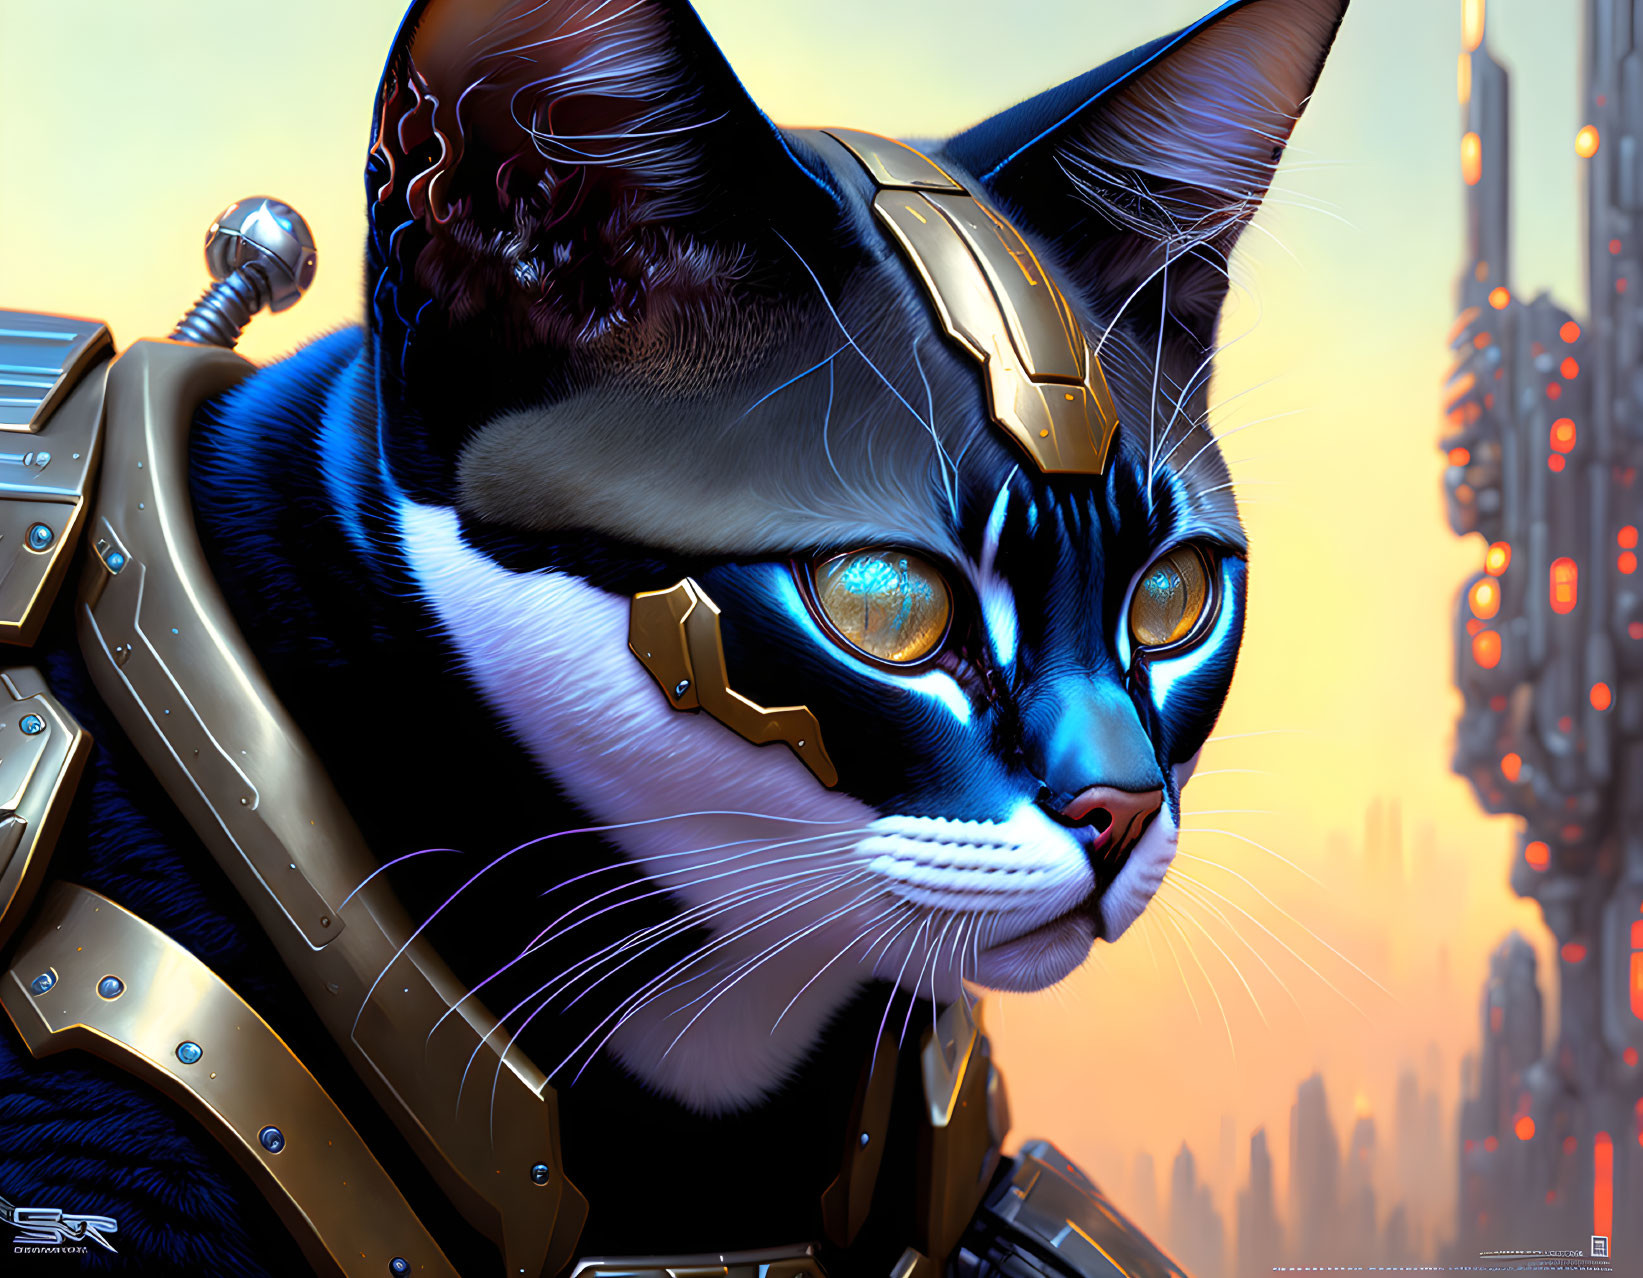 Detailed digital artwork: Cat in futuristic armor with vibrant colors against cityscape.